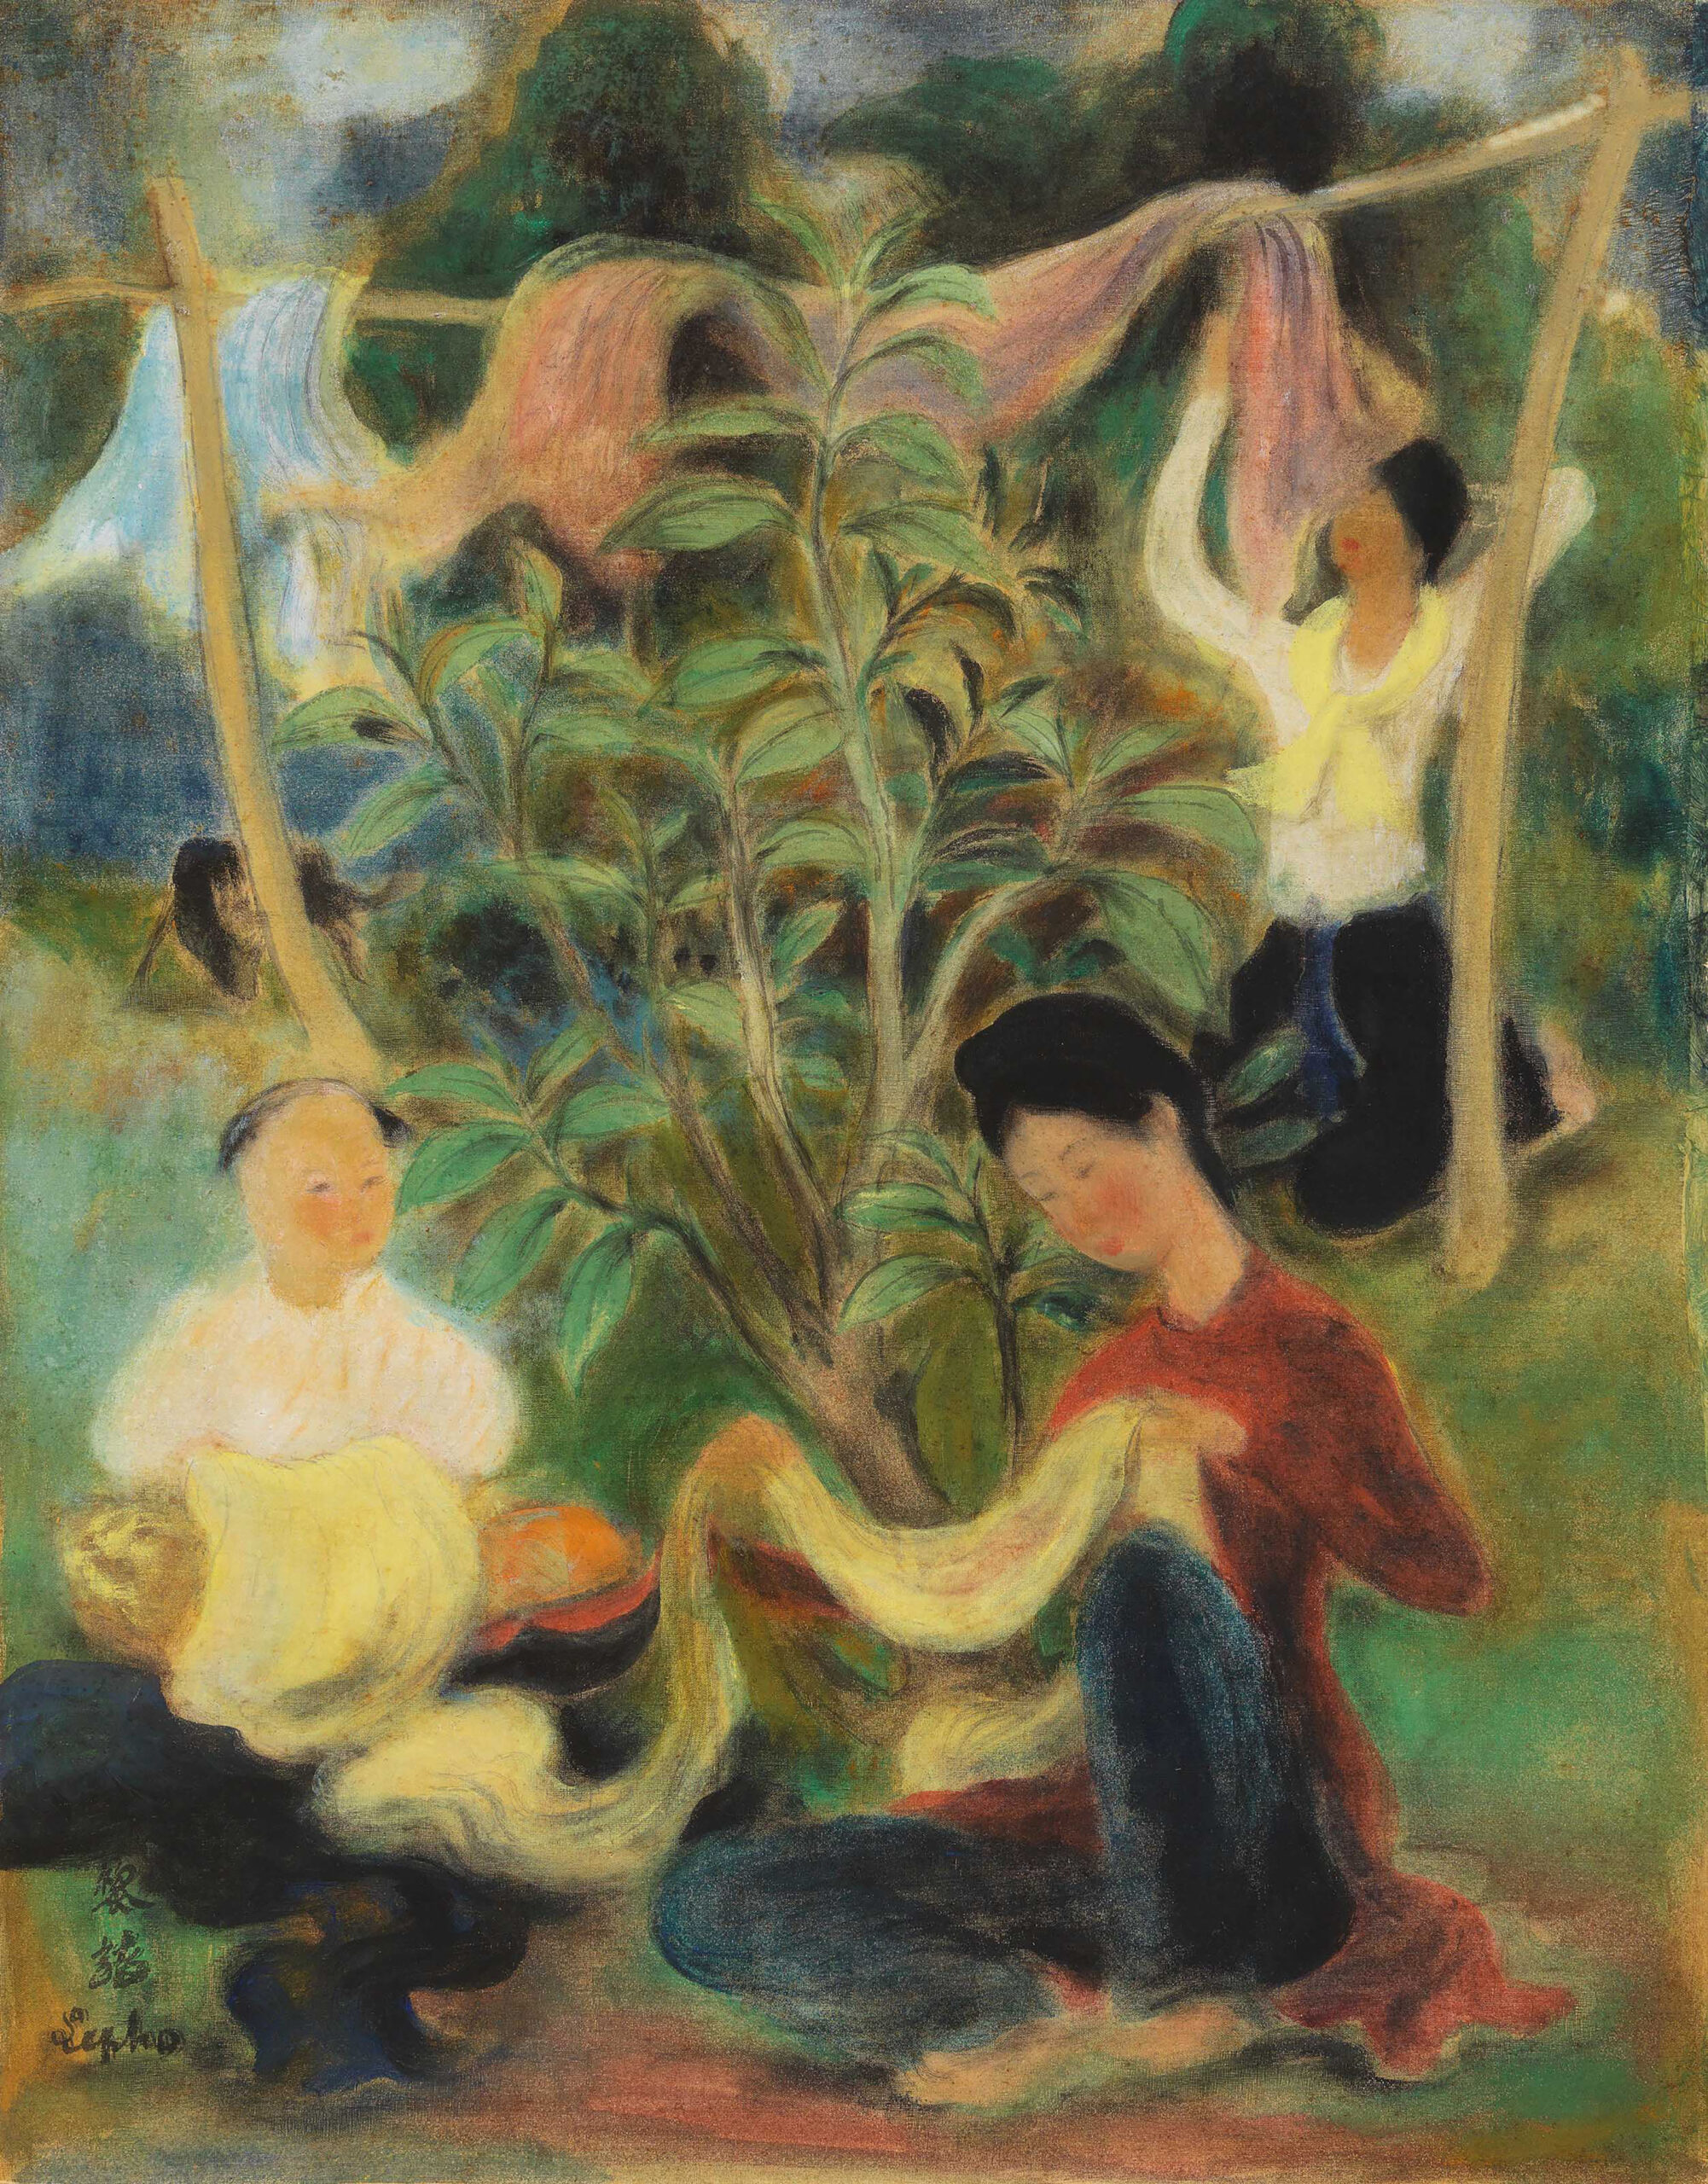 LE PHO (1907-2001)
Les Teinturières 
signed in Chinese and signed 'Le pho' (lower left)
ink and gouache on silk
41.5 x 32 cm. (16 1/4 x 12 1/2 in.)
Painted circa. 1945

Galerie Art Français, Paris, France
Anon. Sale, Sotheby's Singapore, 16 April 2006, lot 88
Acquired at the above sale by the present owner
Private Collection, Asia

Le Pho: Les Teinturières (The Dyers) An Homage to the Vietnamese Dyeing Craft

Le Pho, generally known for his ethereal Madonnas and vibrant flower bouquets, surprisingly has decided here to portray dyers and their craft, a beautiful tribute to the labourers of his homeland working with the traditional Vietnamese materials of cotton and silk.

As early as 679 A.D., a Vietnamese woman by the name of Houang Tao P'o imported the growing and the weaving techniques from the province of Guangdong, China. This knowledge comprised dyeing methods and the fabrication of colour dyes which were distinctively Vietnamese through organic extraction. An example of this would be the extraction from the Vang wood (Caesalpinia Sappan) to provide a vivid red colour.

For many centuries after, the Vietnamese spent centuries exploring, developing and perfecting techniques to obtain the finest raw cotton cloth used in all commodities using weaving and dyeing. 

Le Pho was distinctly aware and admired this aspect of Vietnamese craftsmanship and skill, and always claimed that one had to fully master the handiwork of their art before any chance of becoming a great artist. It might explain why Le Pho decided to paint un hommage to the Vietnamese artisans' hard work and their dedication to their craft. The dyer's sensibility to the intensity and quality of colour is at the centre of their skill and essential to the technique of silk painting as they needed to have an in-depth understanding of the visual effects of dye on cloth.

The dyer and the painter work hand in hand to generate an art form unique to the Vietnamese aesthetic. Set in lush and abundant green surroundings, two seated ladies handle the roll of cloth at hand, while in the background another hangs on a clothesline some cloth for drying.

The portrayal of a real-life observation leads to a simple composition that only serves to highlight and underline the multiple skills and processes required in their craft. 

There are no kings without their subjects, as there are no great artists that are not an heir claiming his national identity. Le Pho captures the essence of this, and leaves a strong imprint of his culture, on both national or international levels. This stunning painting is a perfect illustration.

Jean-Francois Hubert
Senior Expert, Vietnamese Art